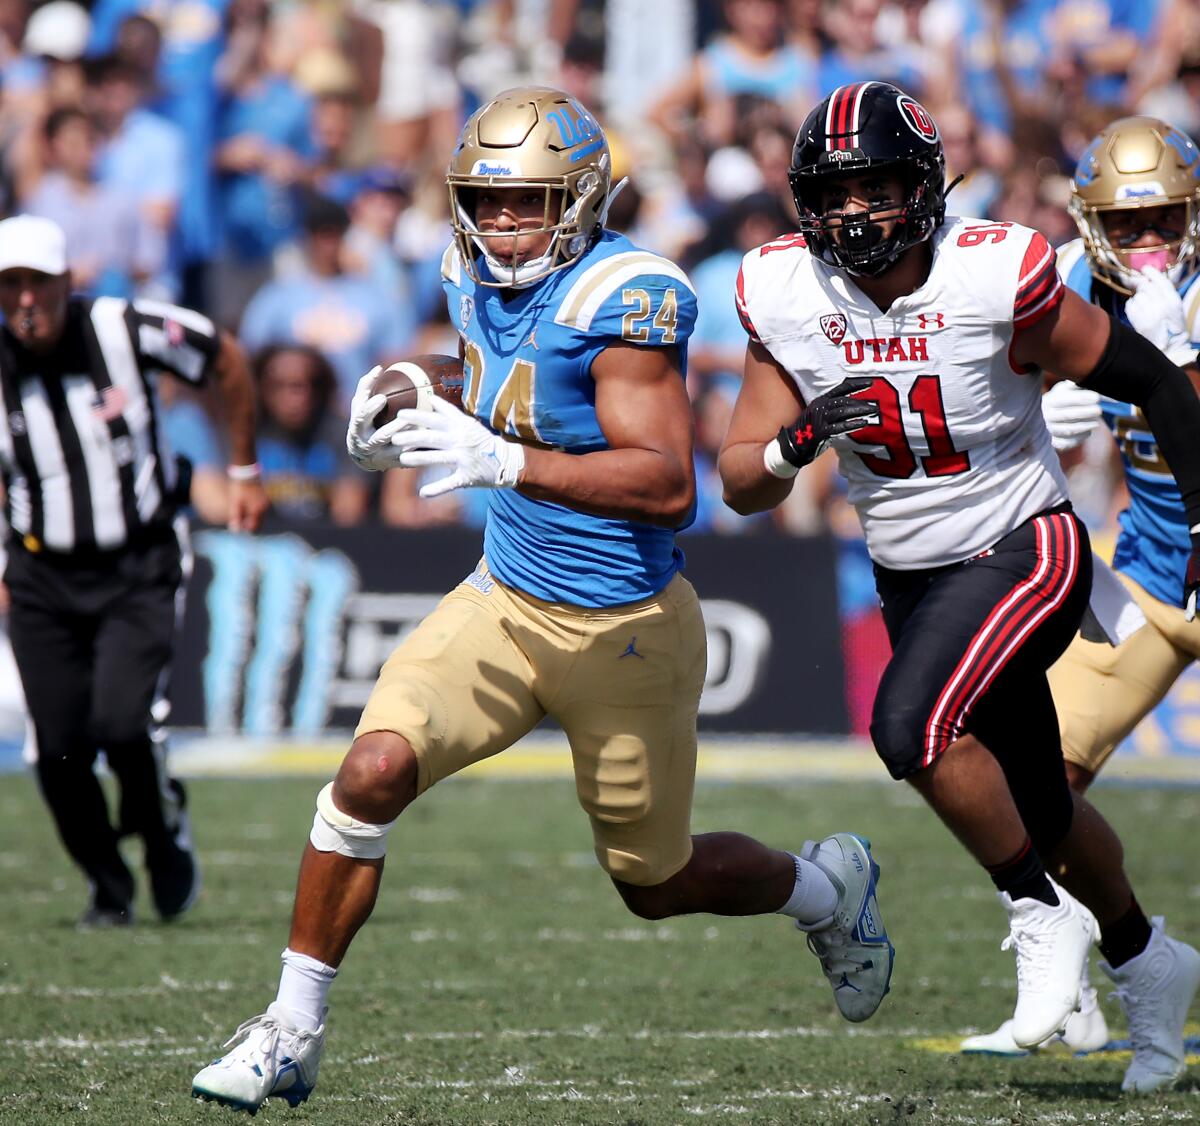 UCLA running back Zach Charbonnet carries the ball during a win over Utah.